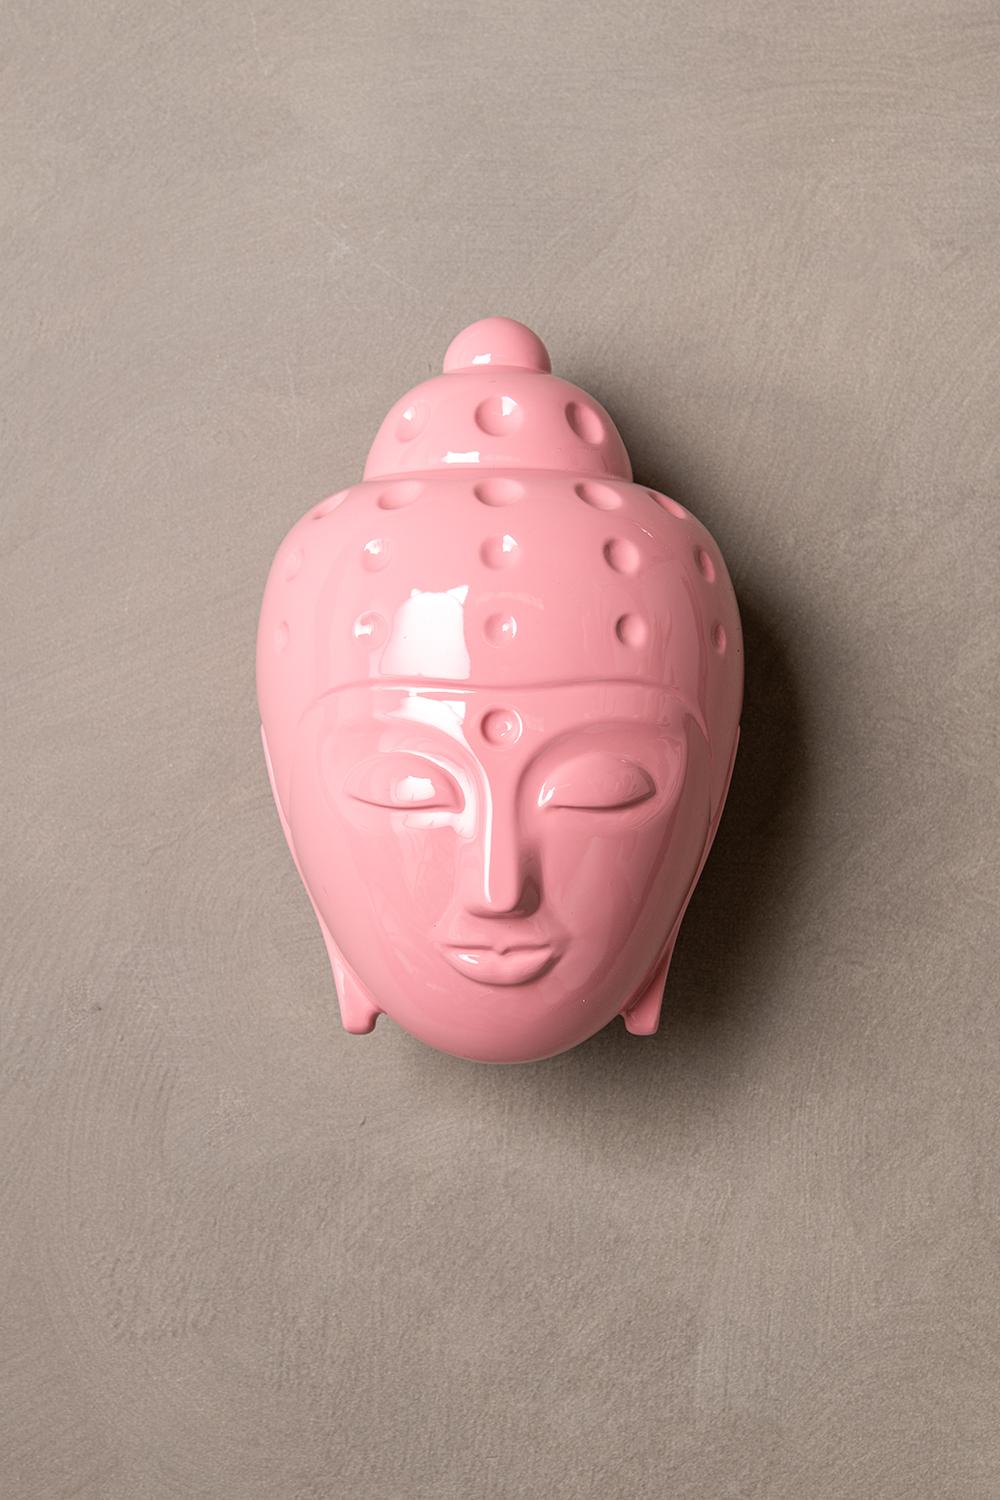 Contemporary buddha head figurative sculpture - painted in pink car paint - Sculpture by Tal Nehoray